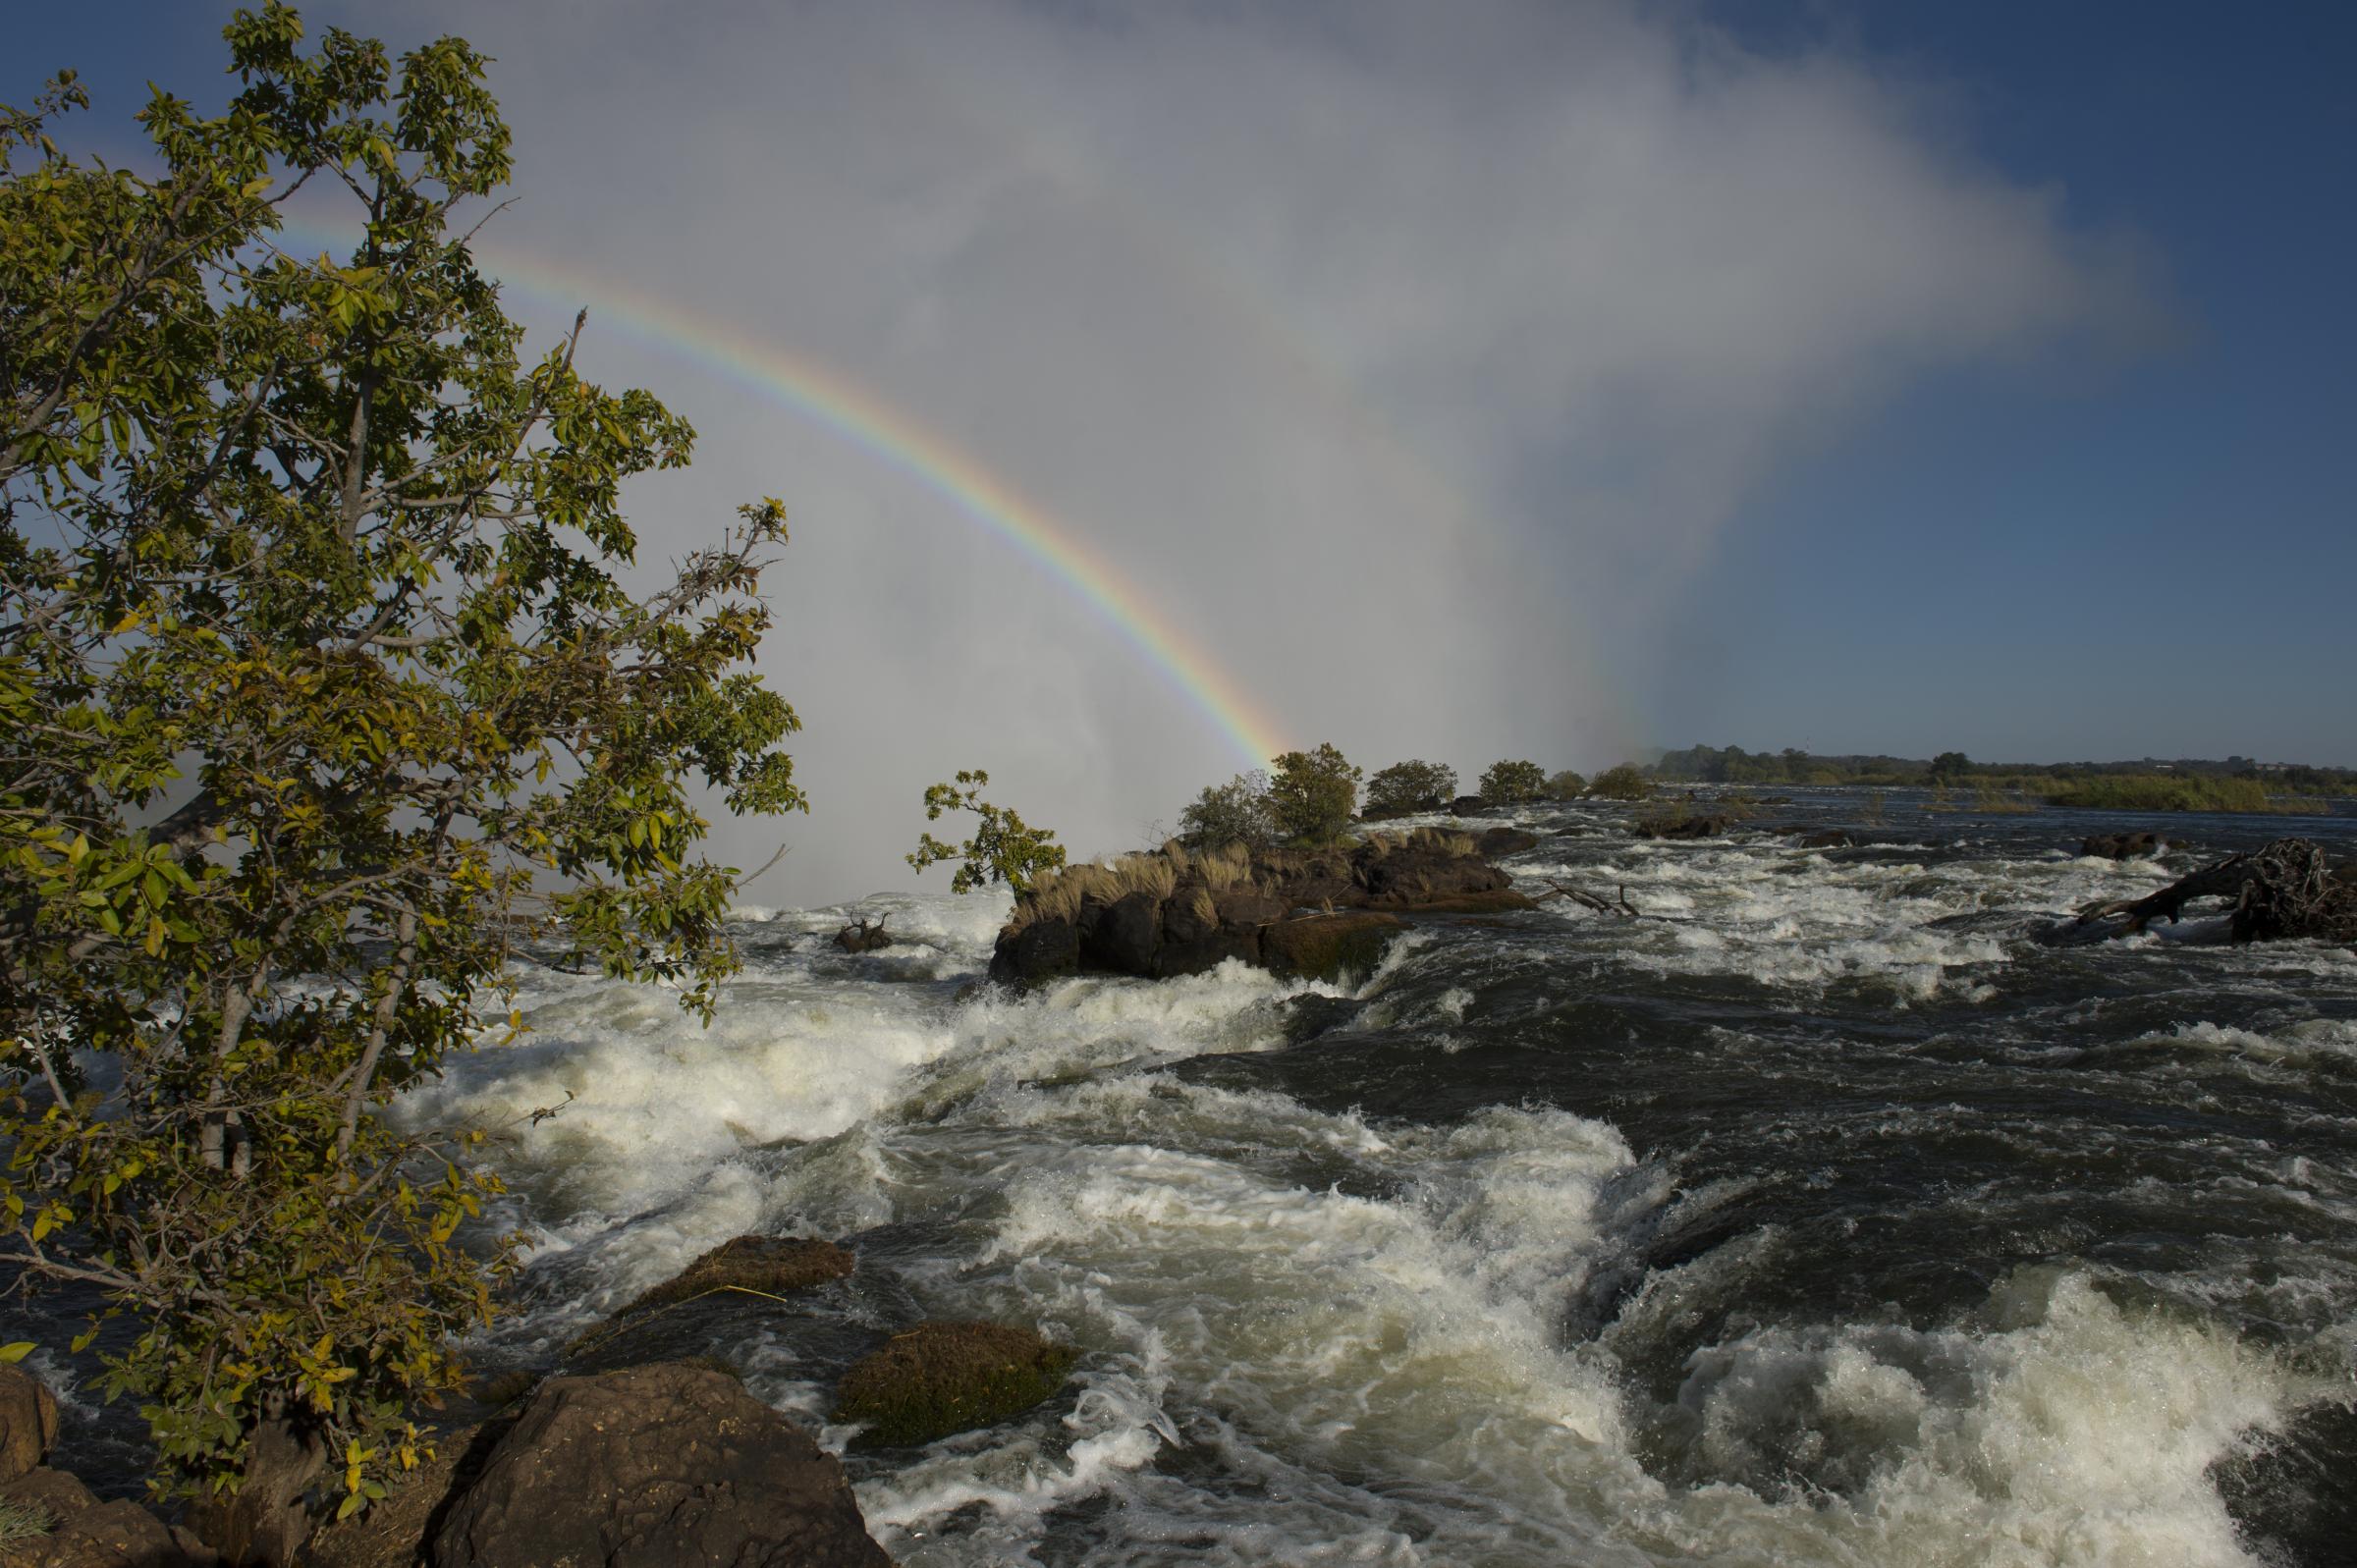 Rainbow over Victoria Falls seen from the shore of the